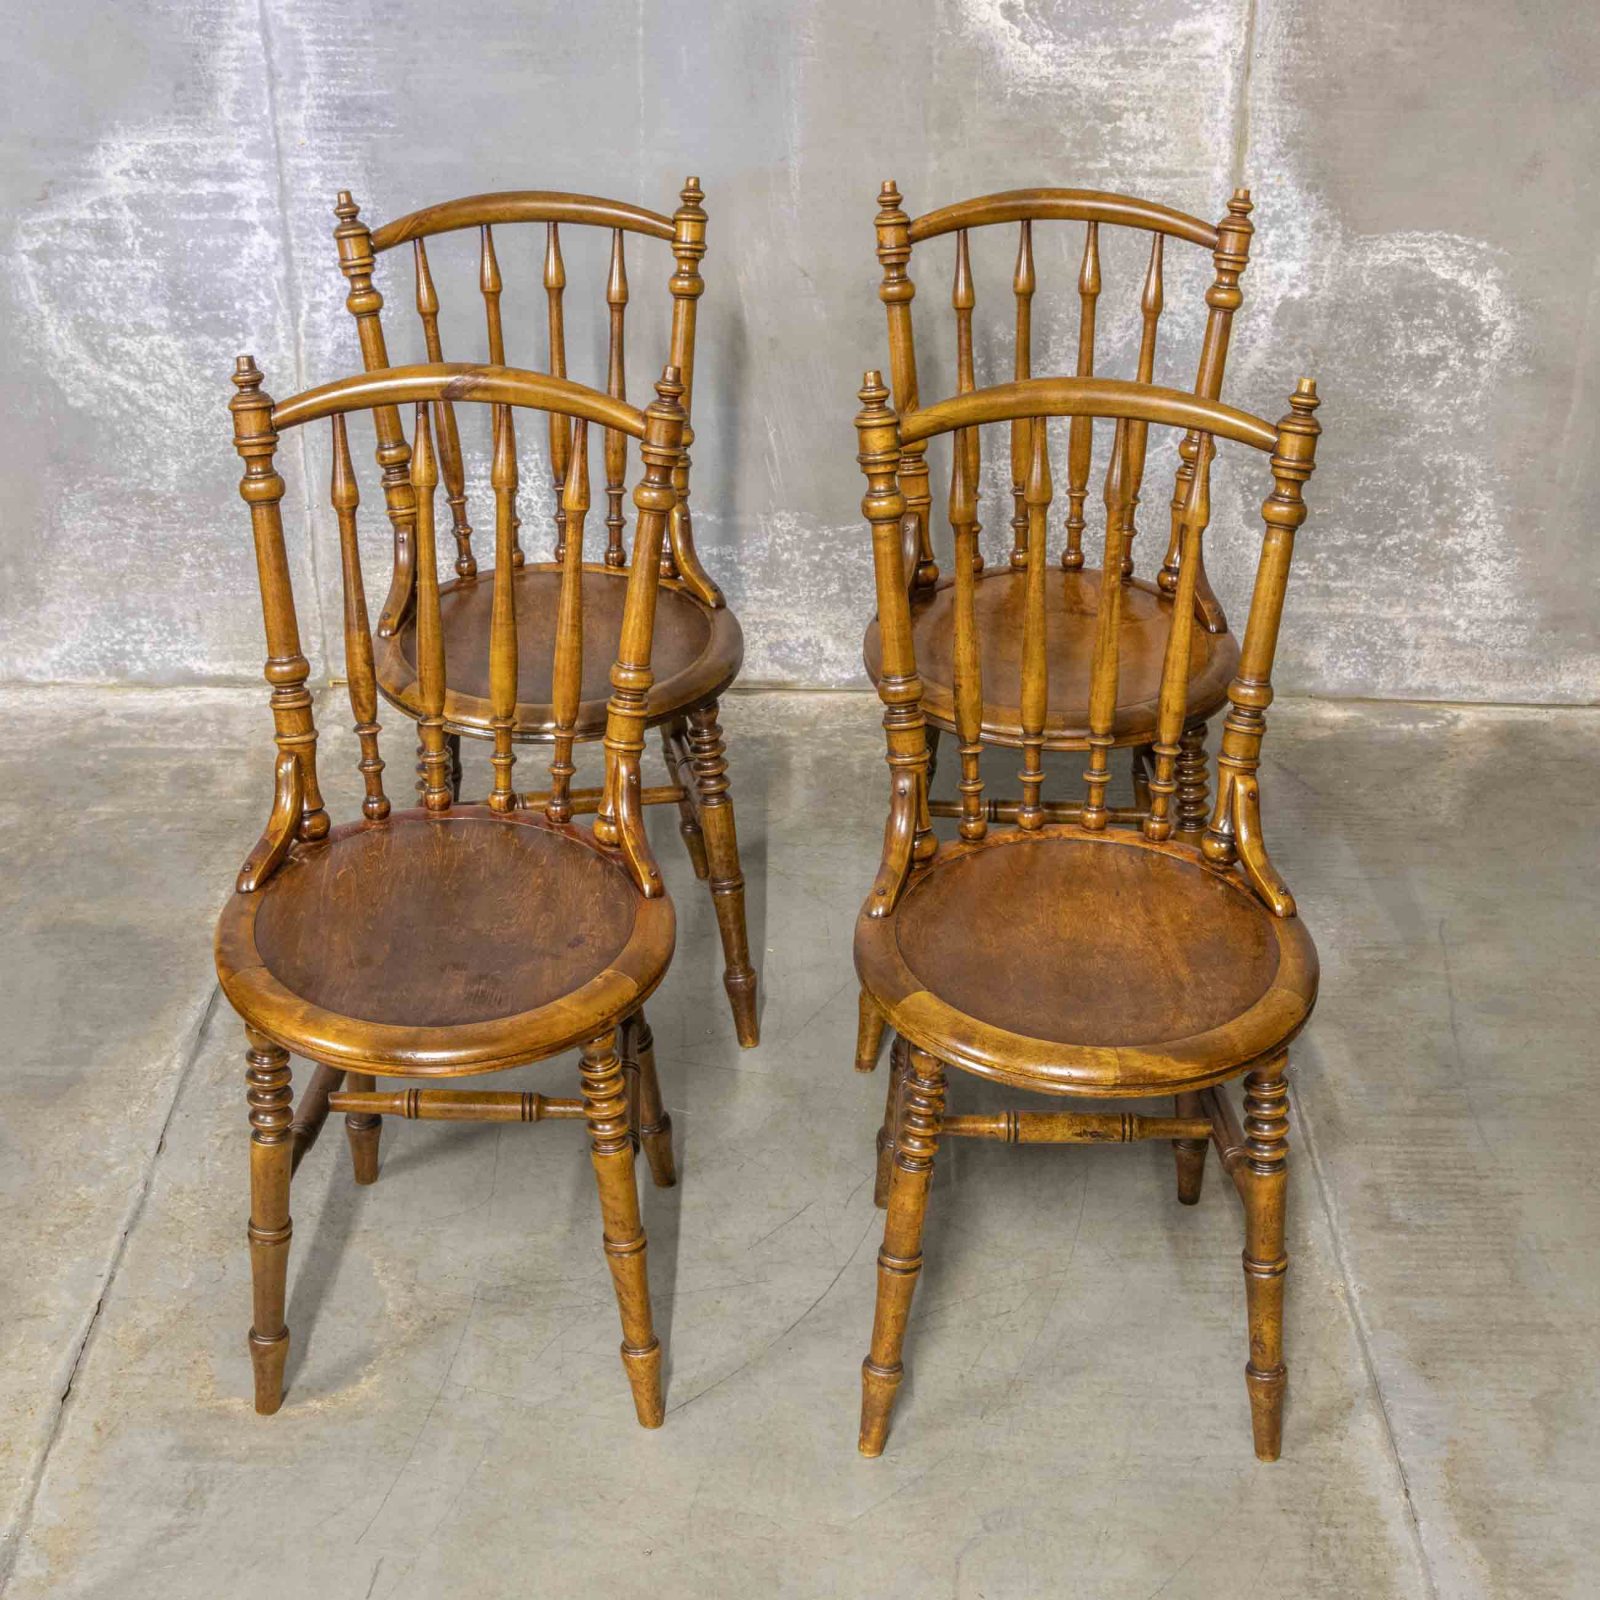 Set of Four Bentwood Chairs